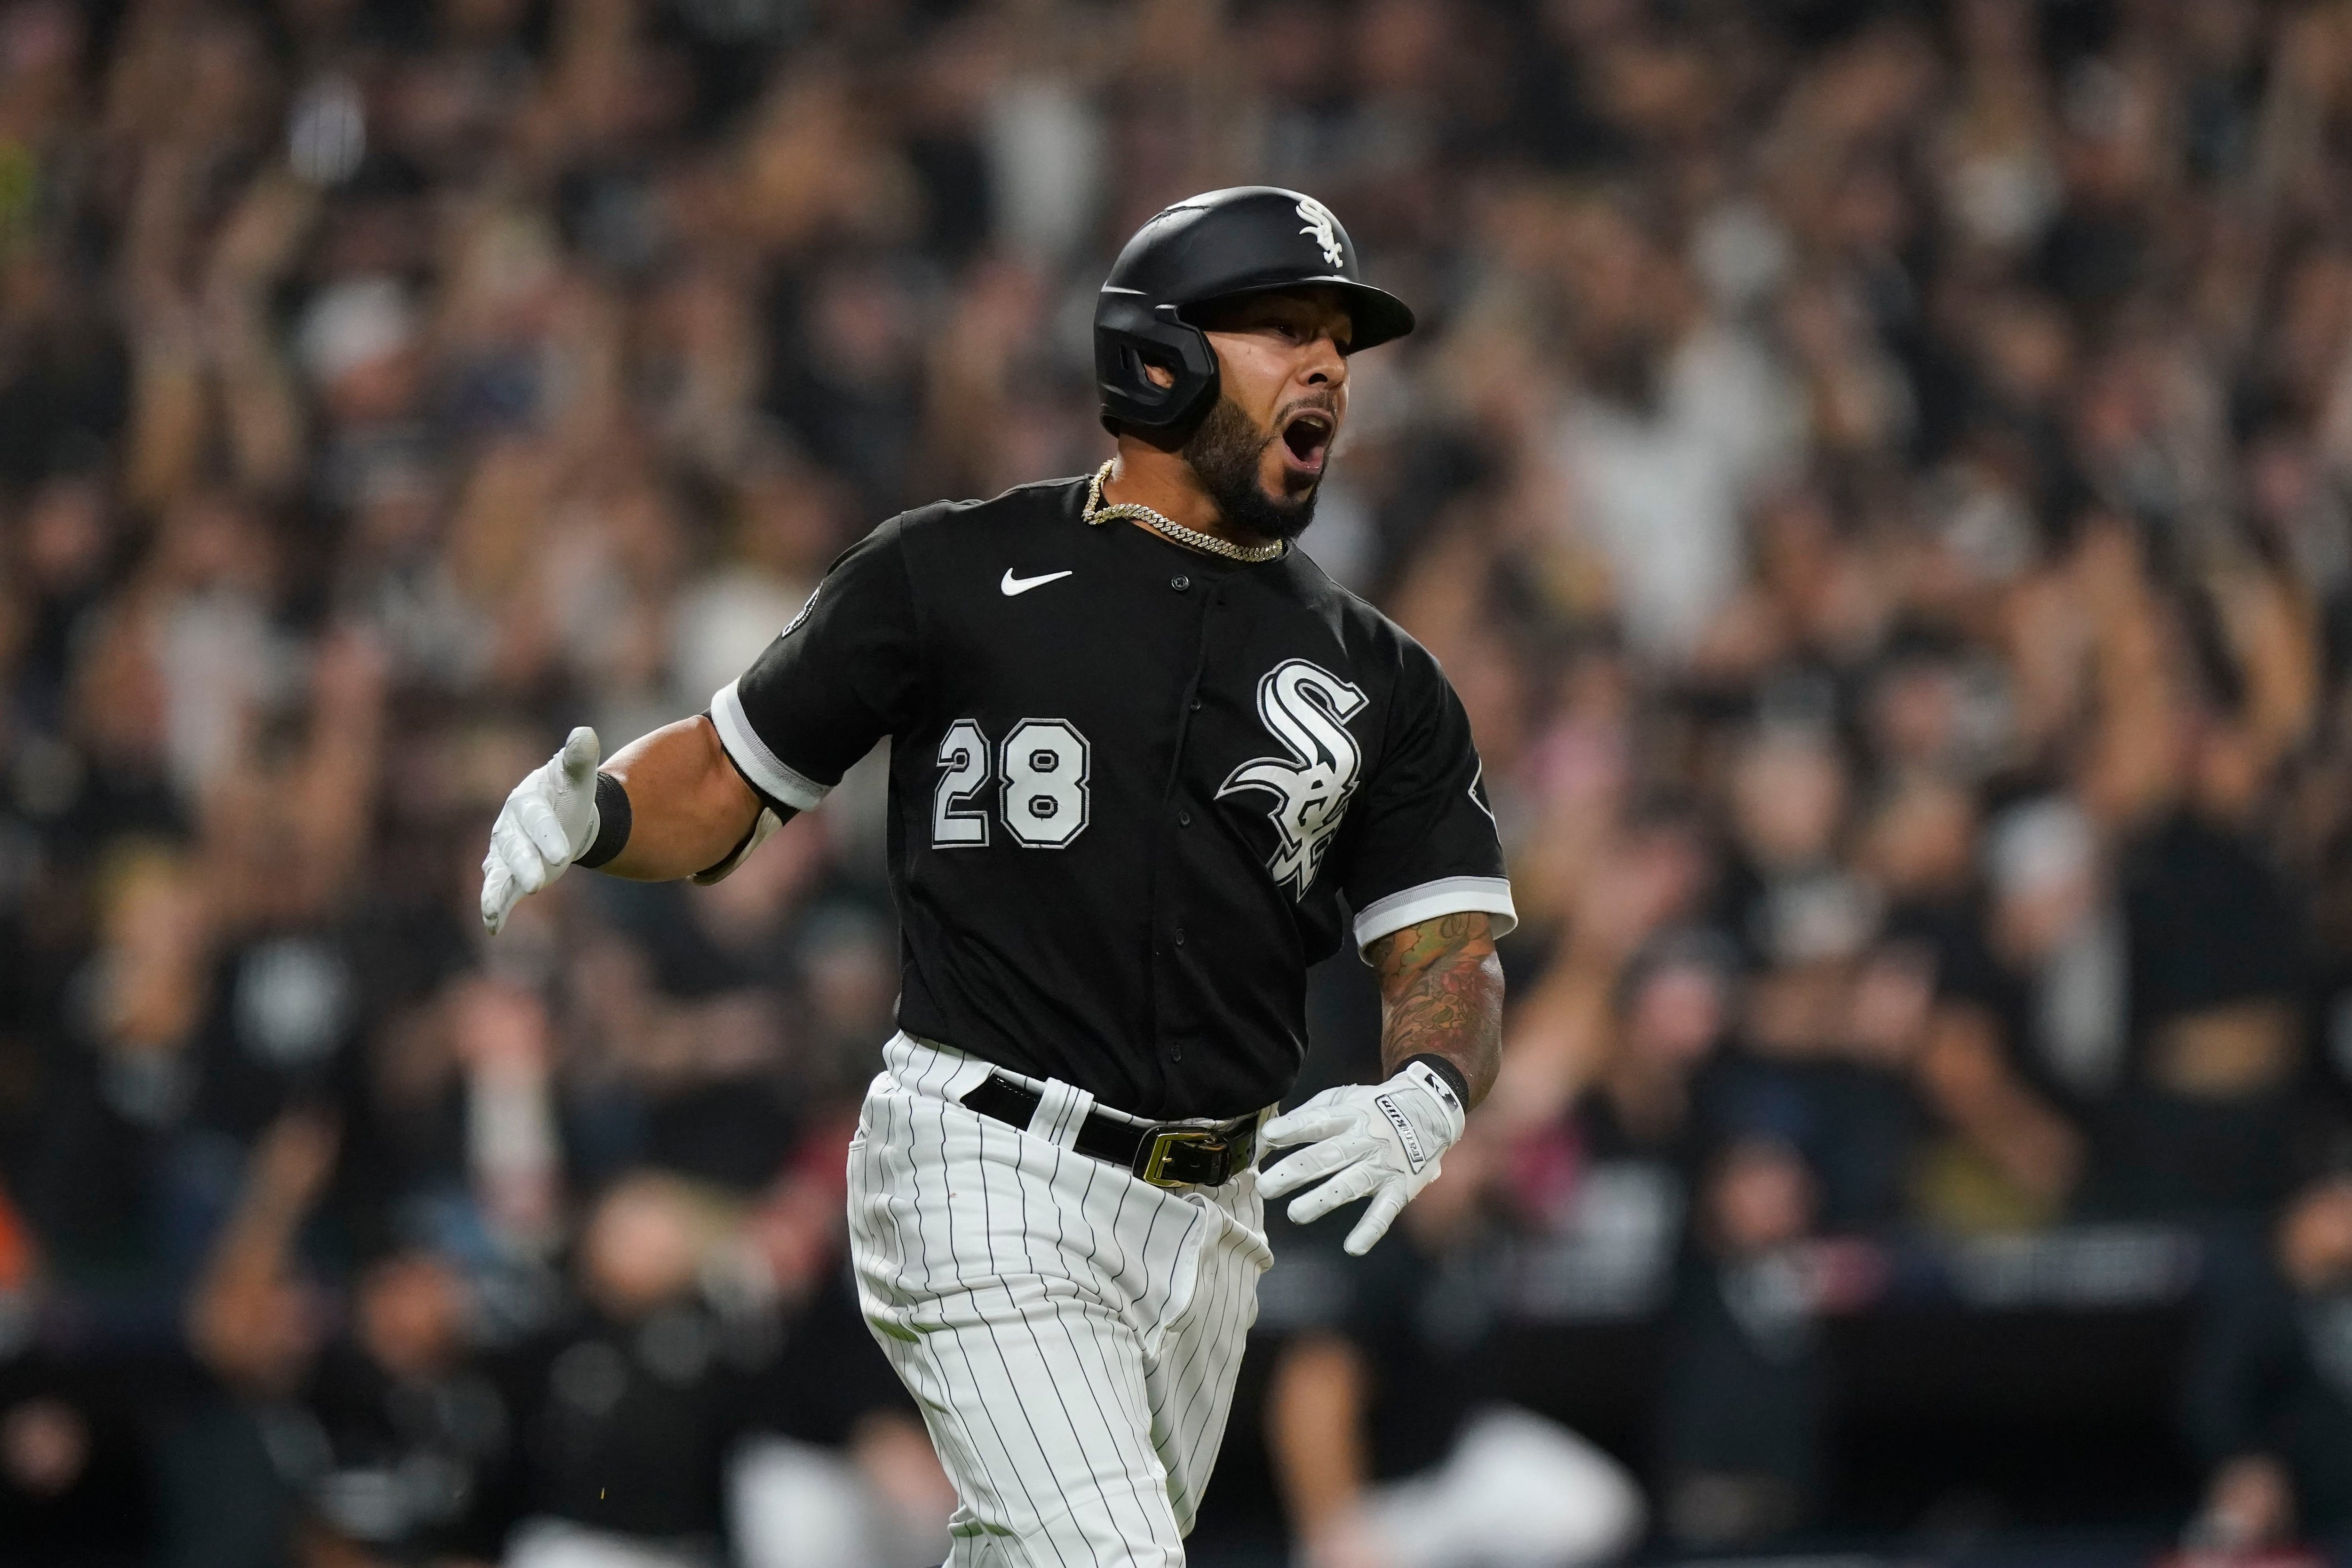 Tim Anderson Is Right: The AL Should Fear the White Sox